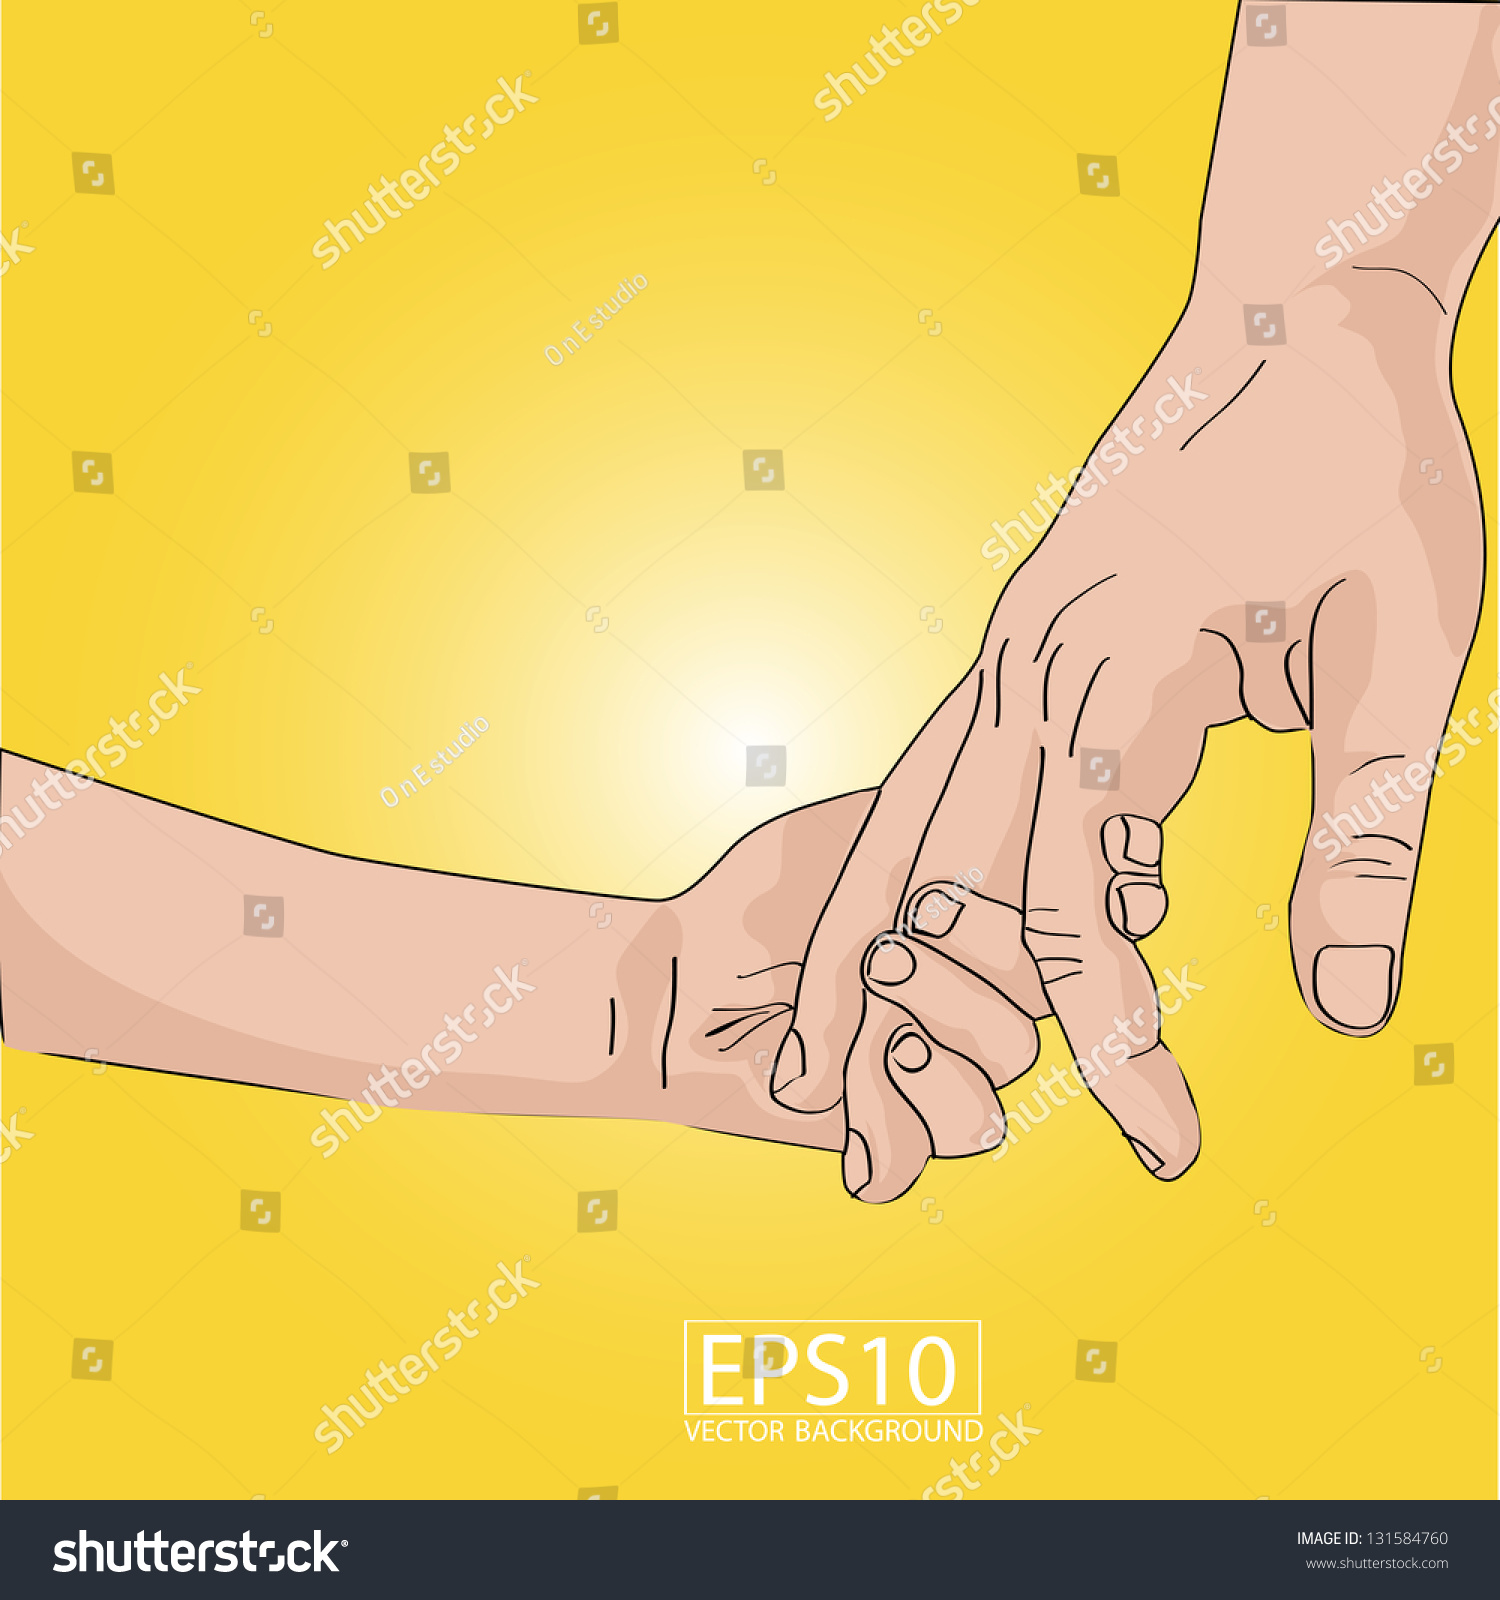 Download Father Son Holding Hand Handvector Eps 10 Stock Vector ...